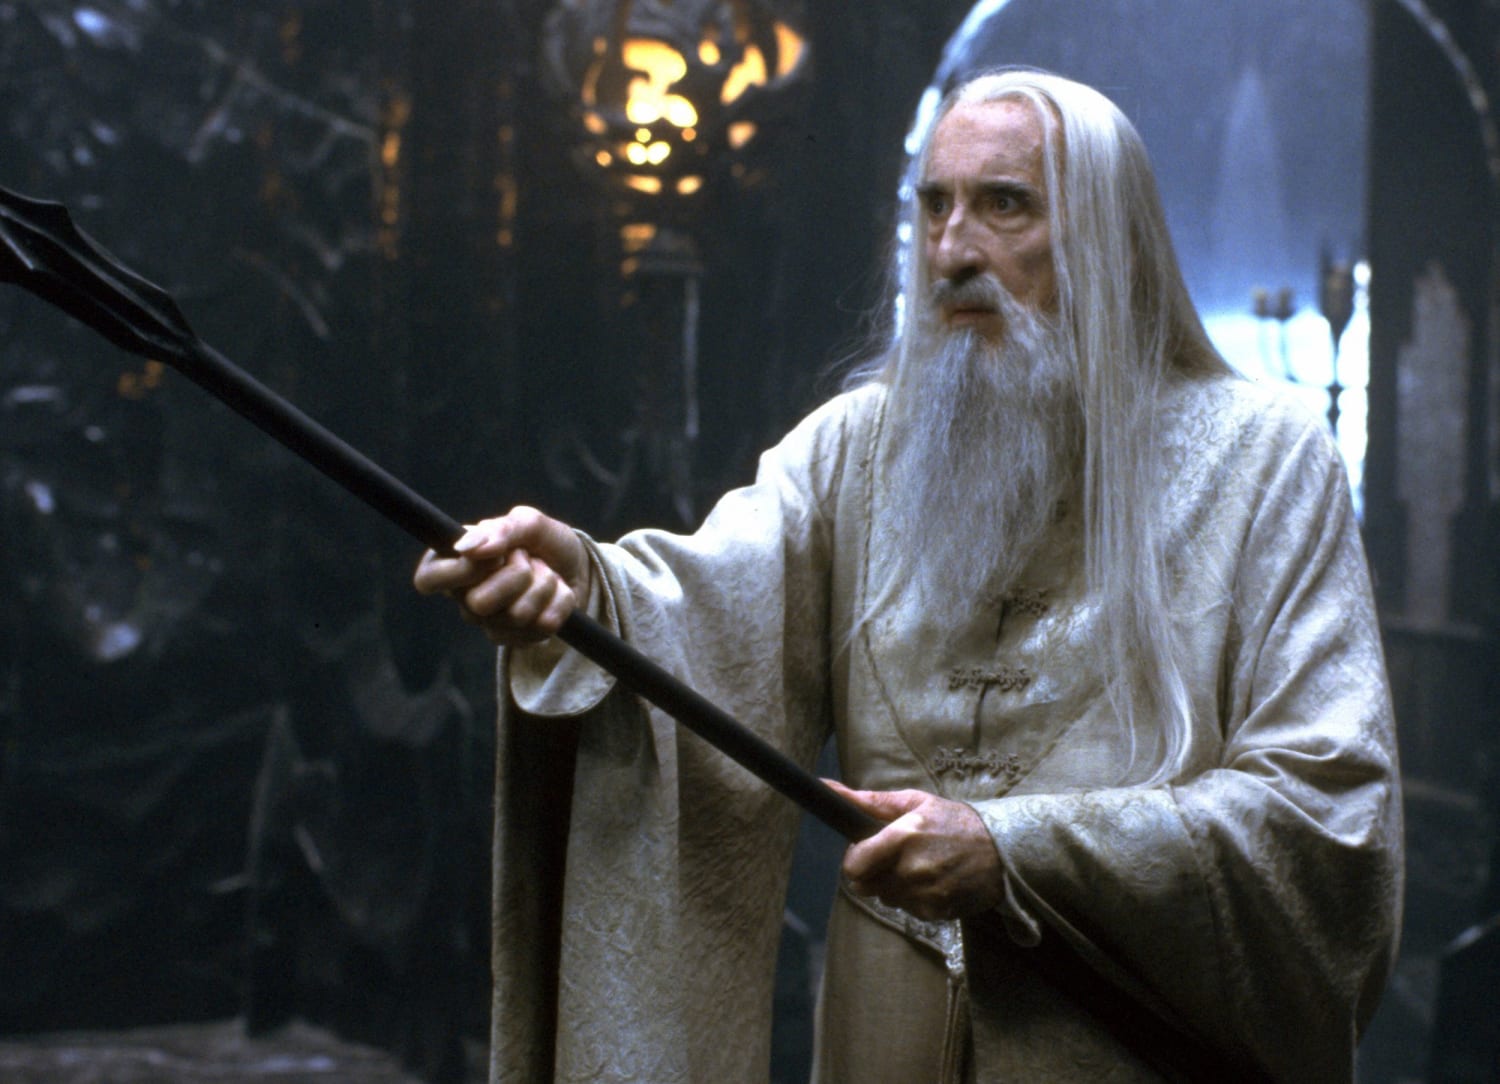 Christopher Lee, 'Star Wars' and 'Lord of the Rings' Actor, Dies: Reports